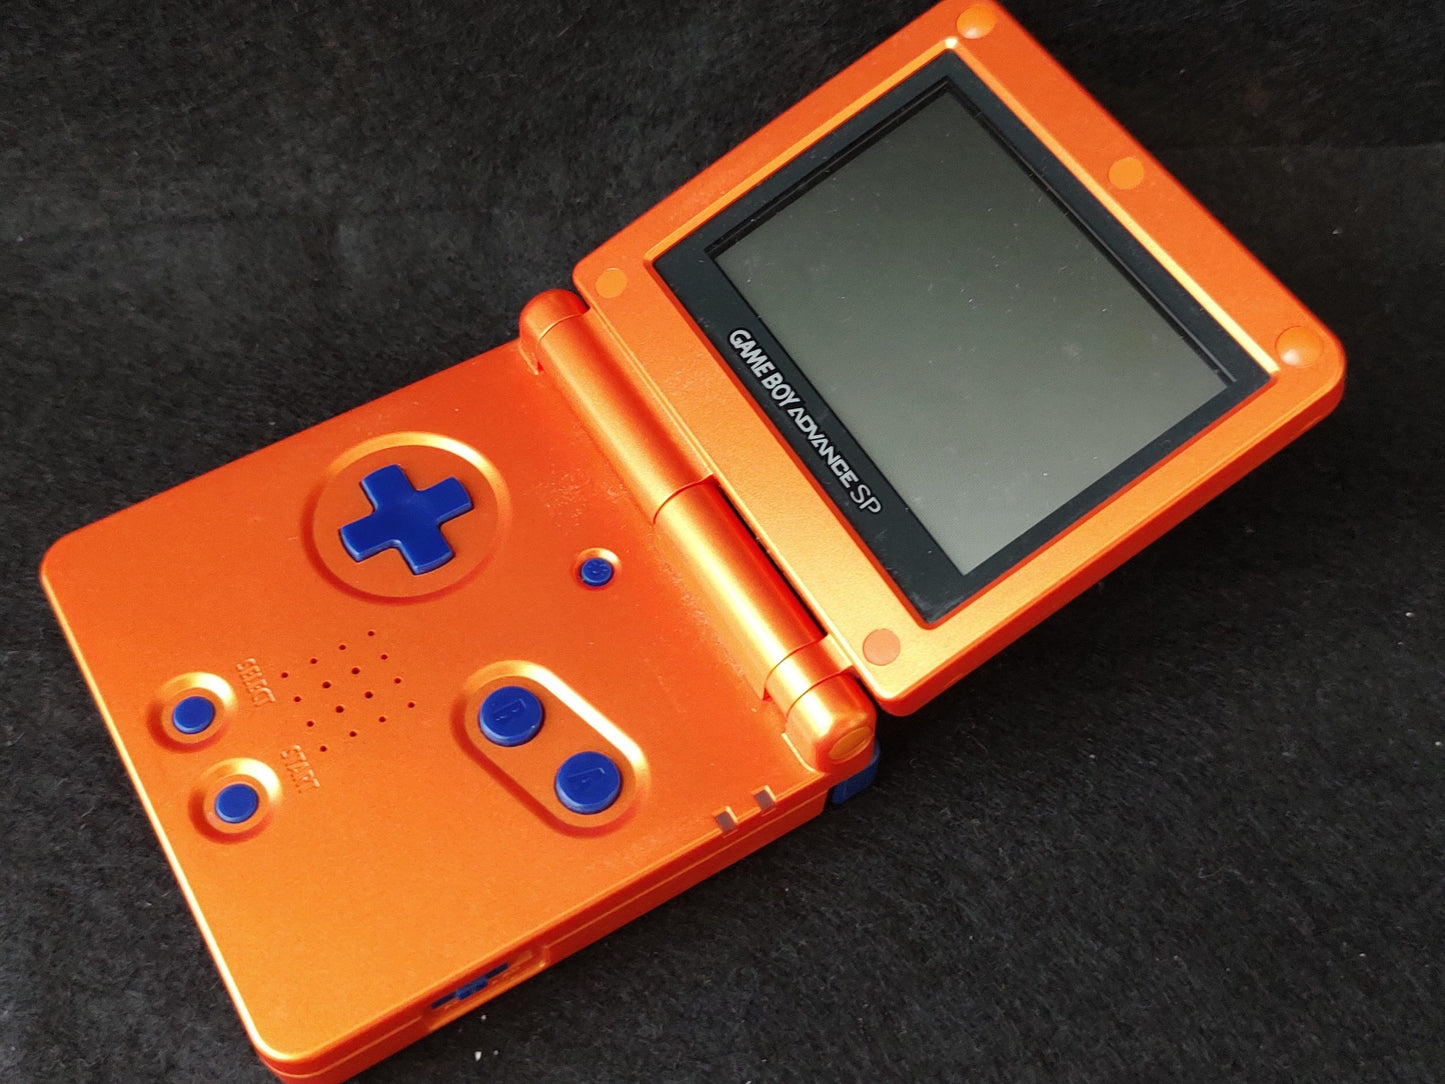 NARUTO orange color LIMITED EDITION GAMEBOY ADVANCE SP CONSOLE and Game-f0827-